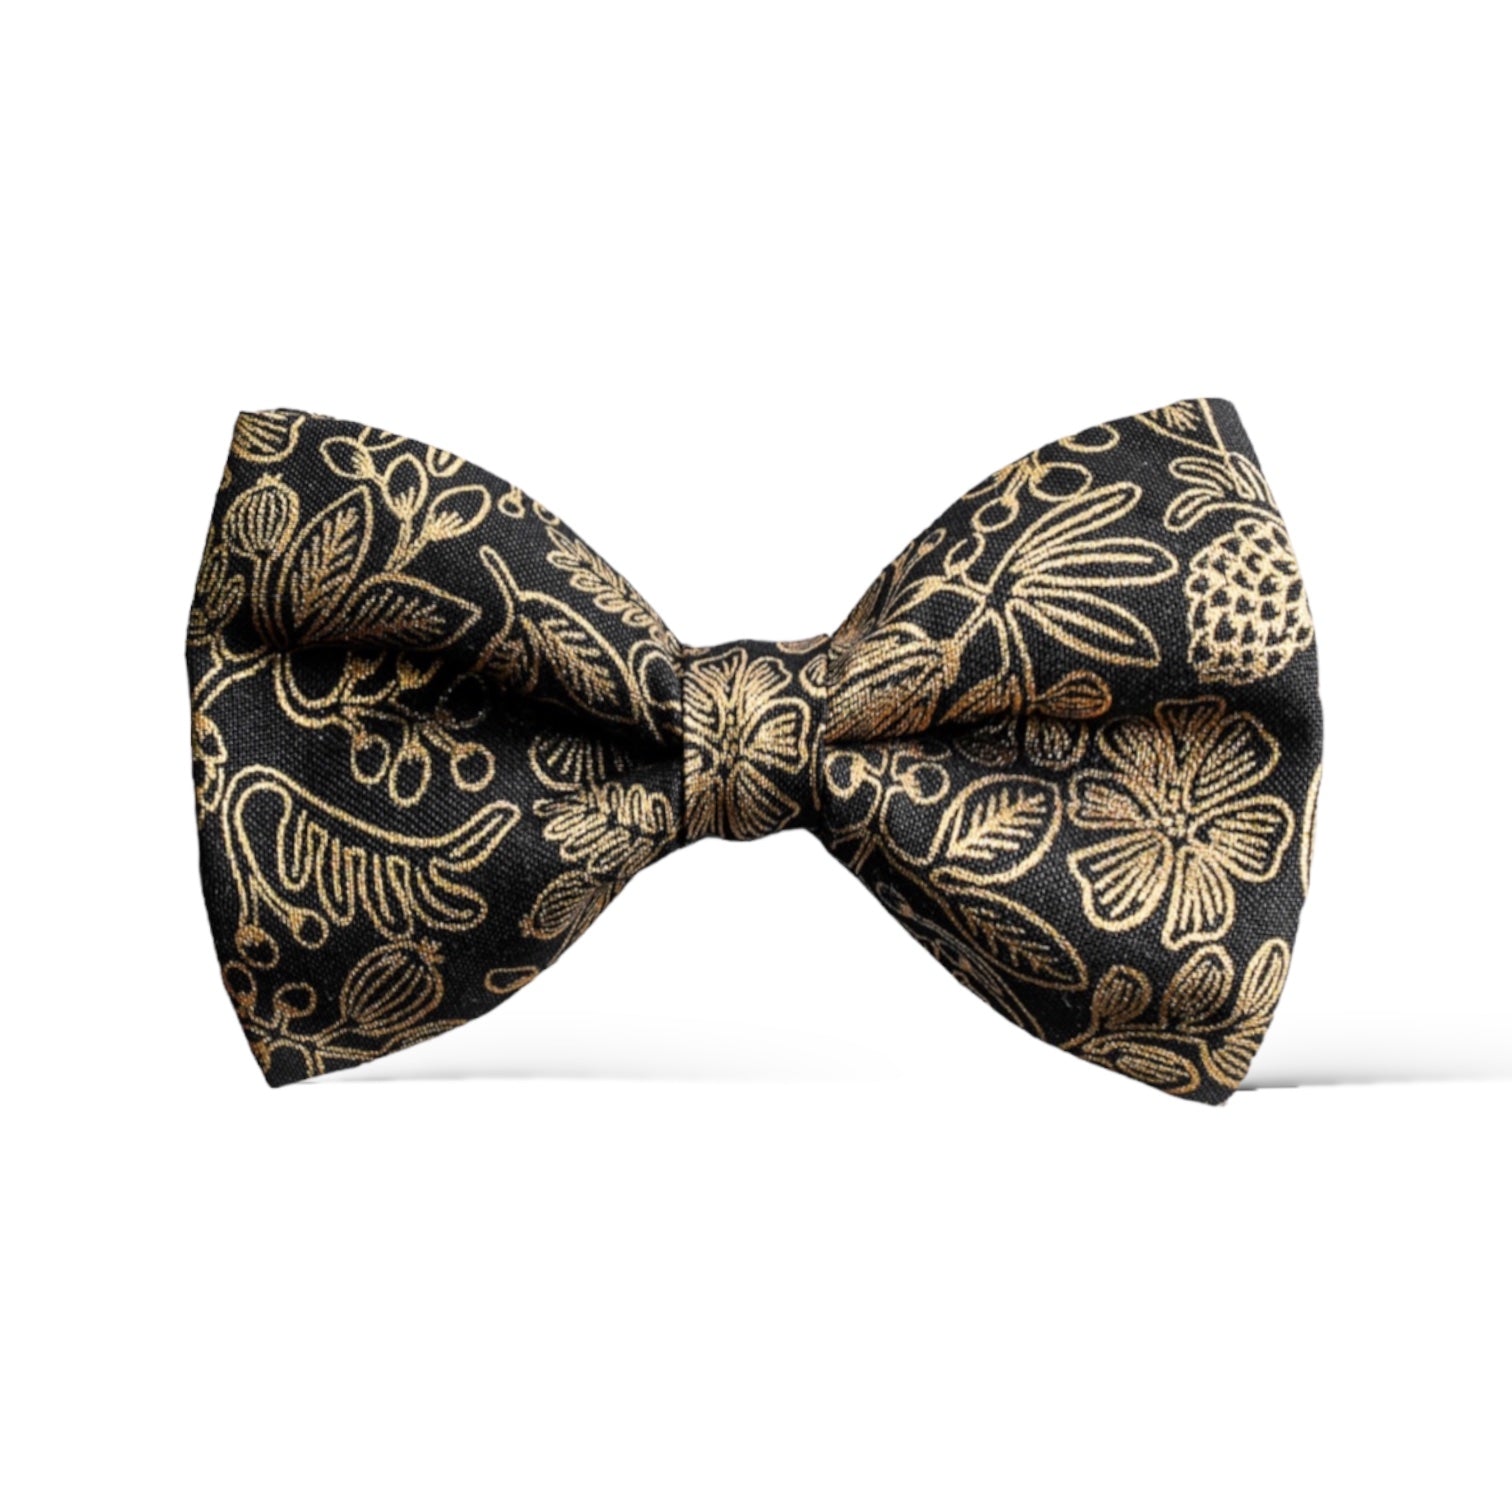 Black & Gold Floral Bow Tie